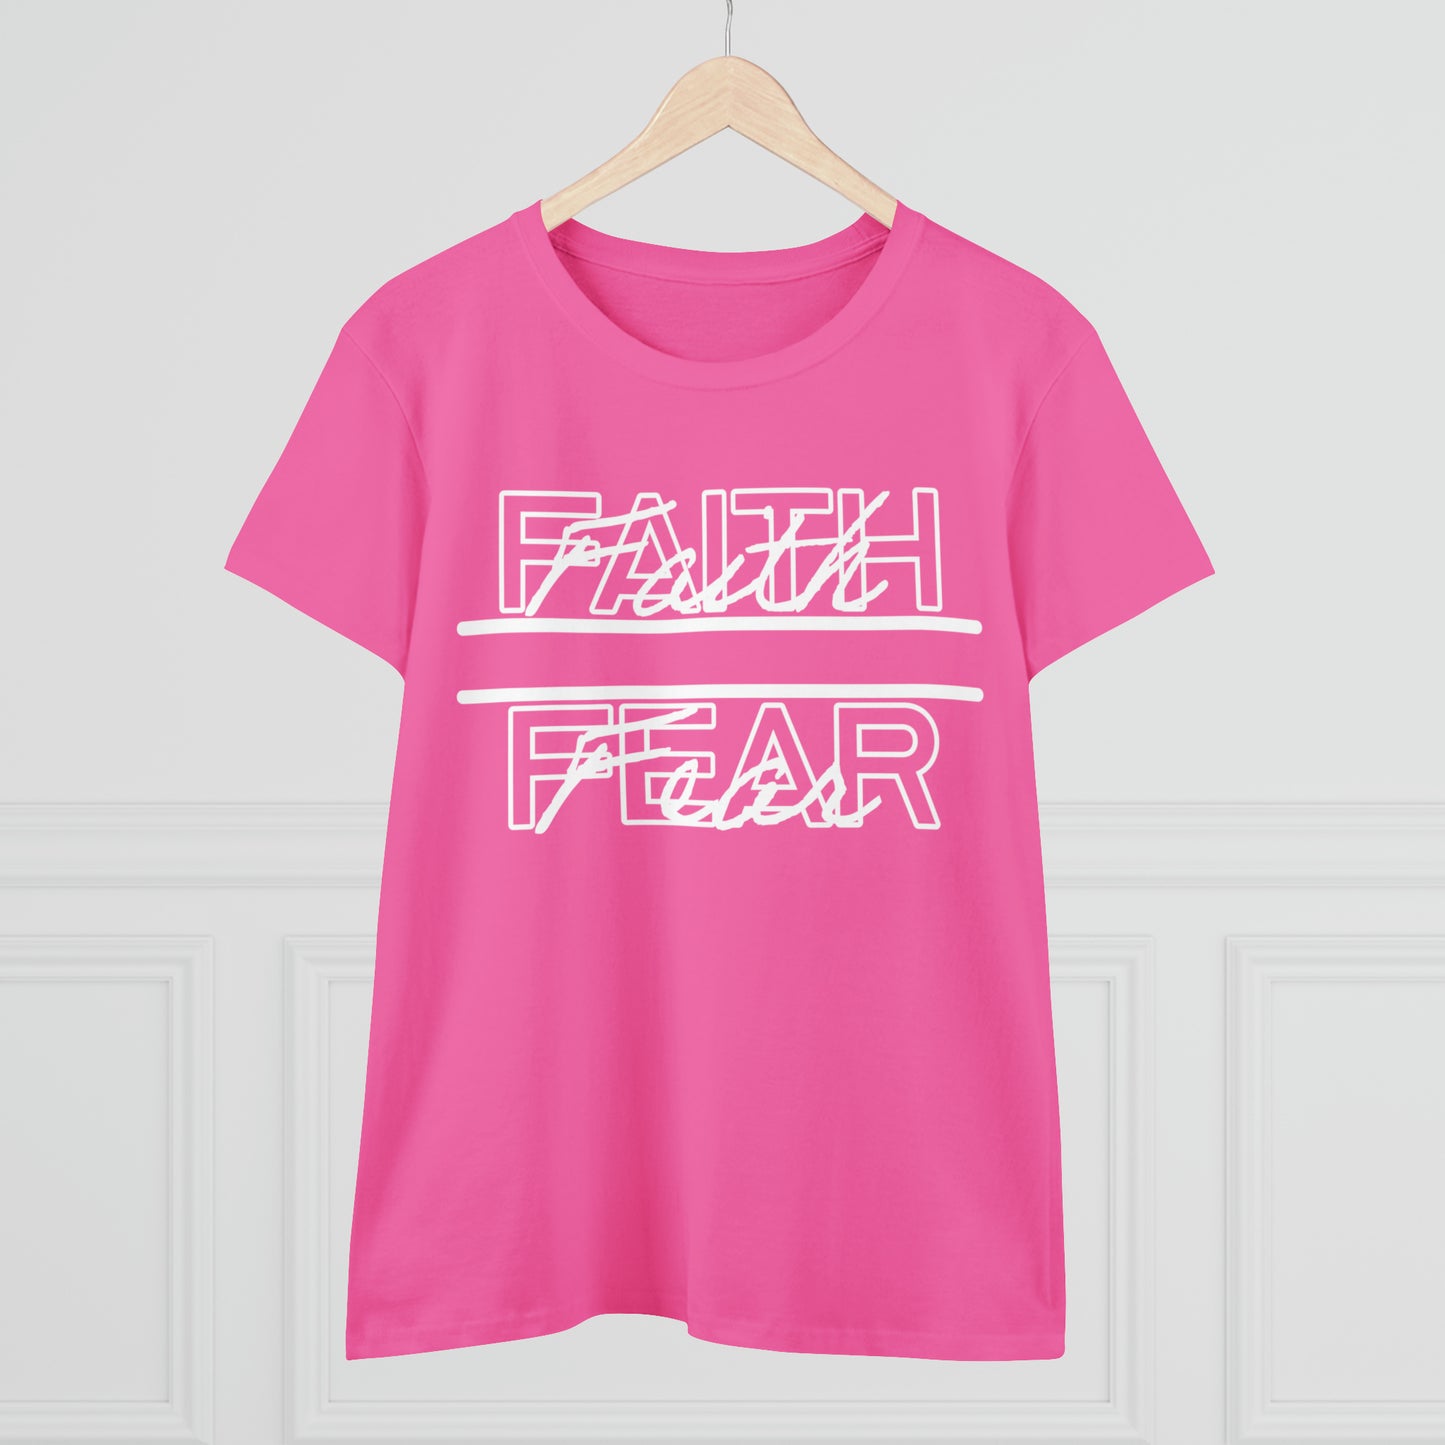 Faith Over Fear Ladies Bible Verse Shirt, Relaxed Fit Short Sleeve T-Shirt, Ladies Crewneck, Woman's Cotton Tee